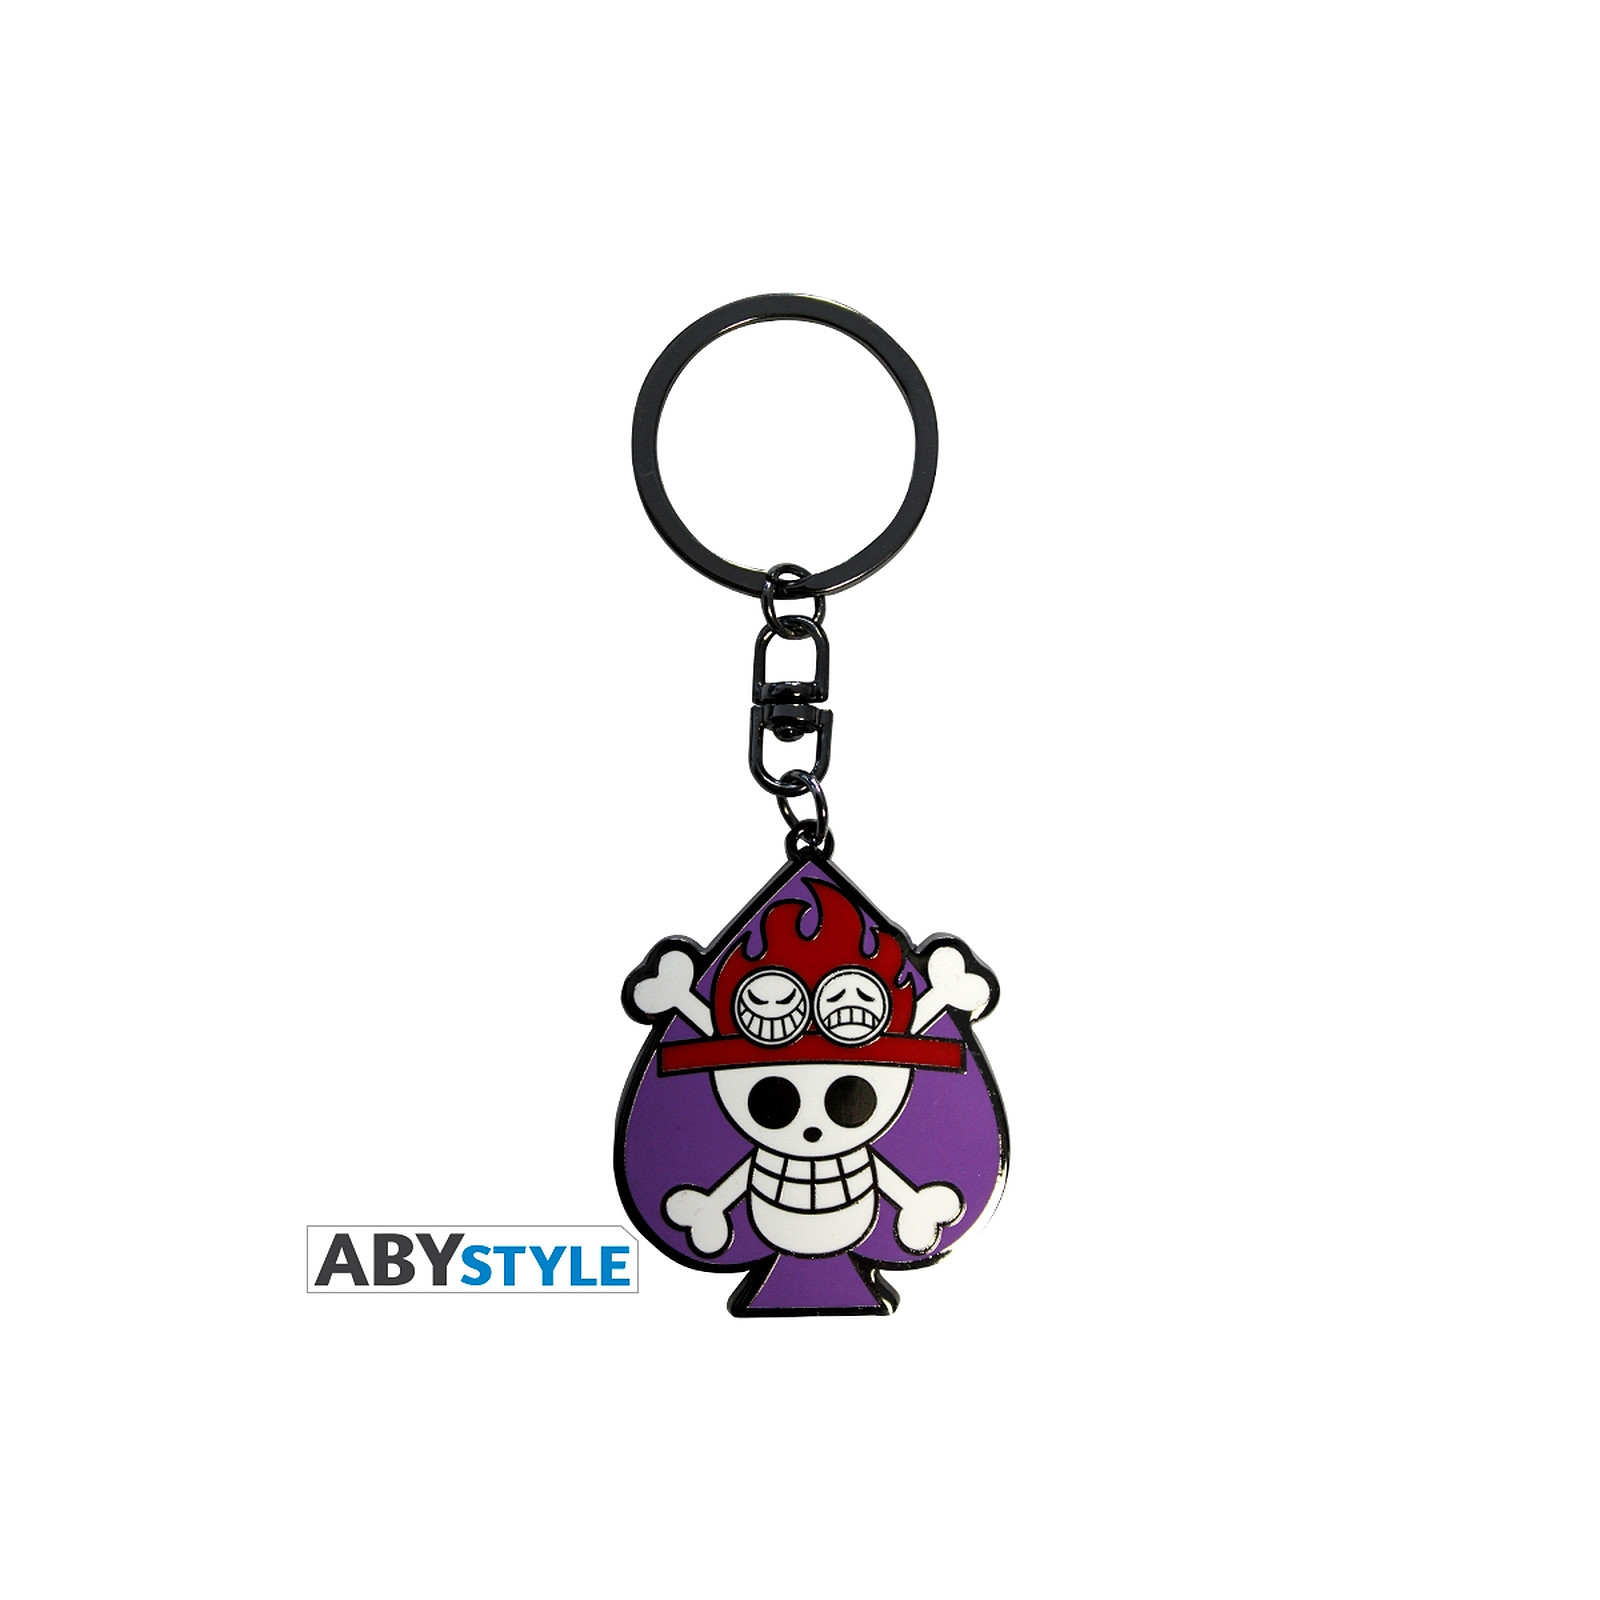 One Piece - Porte-cles Skull Ace - Porte-cles Abystyle